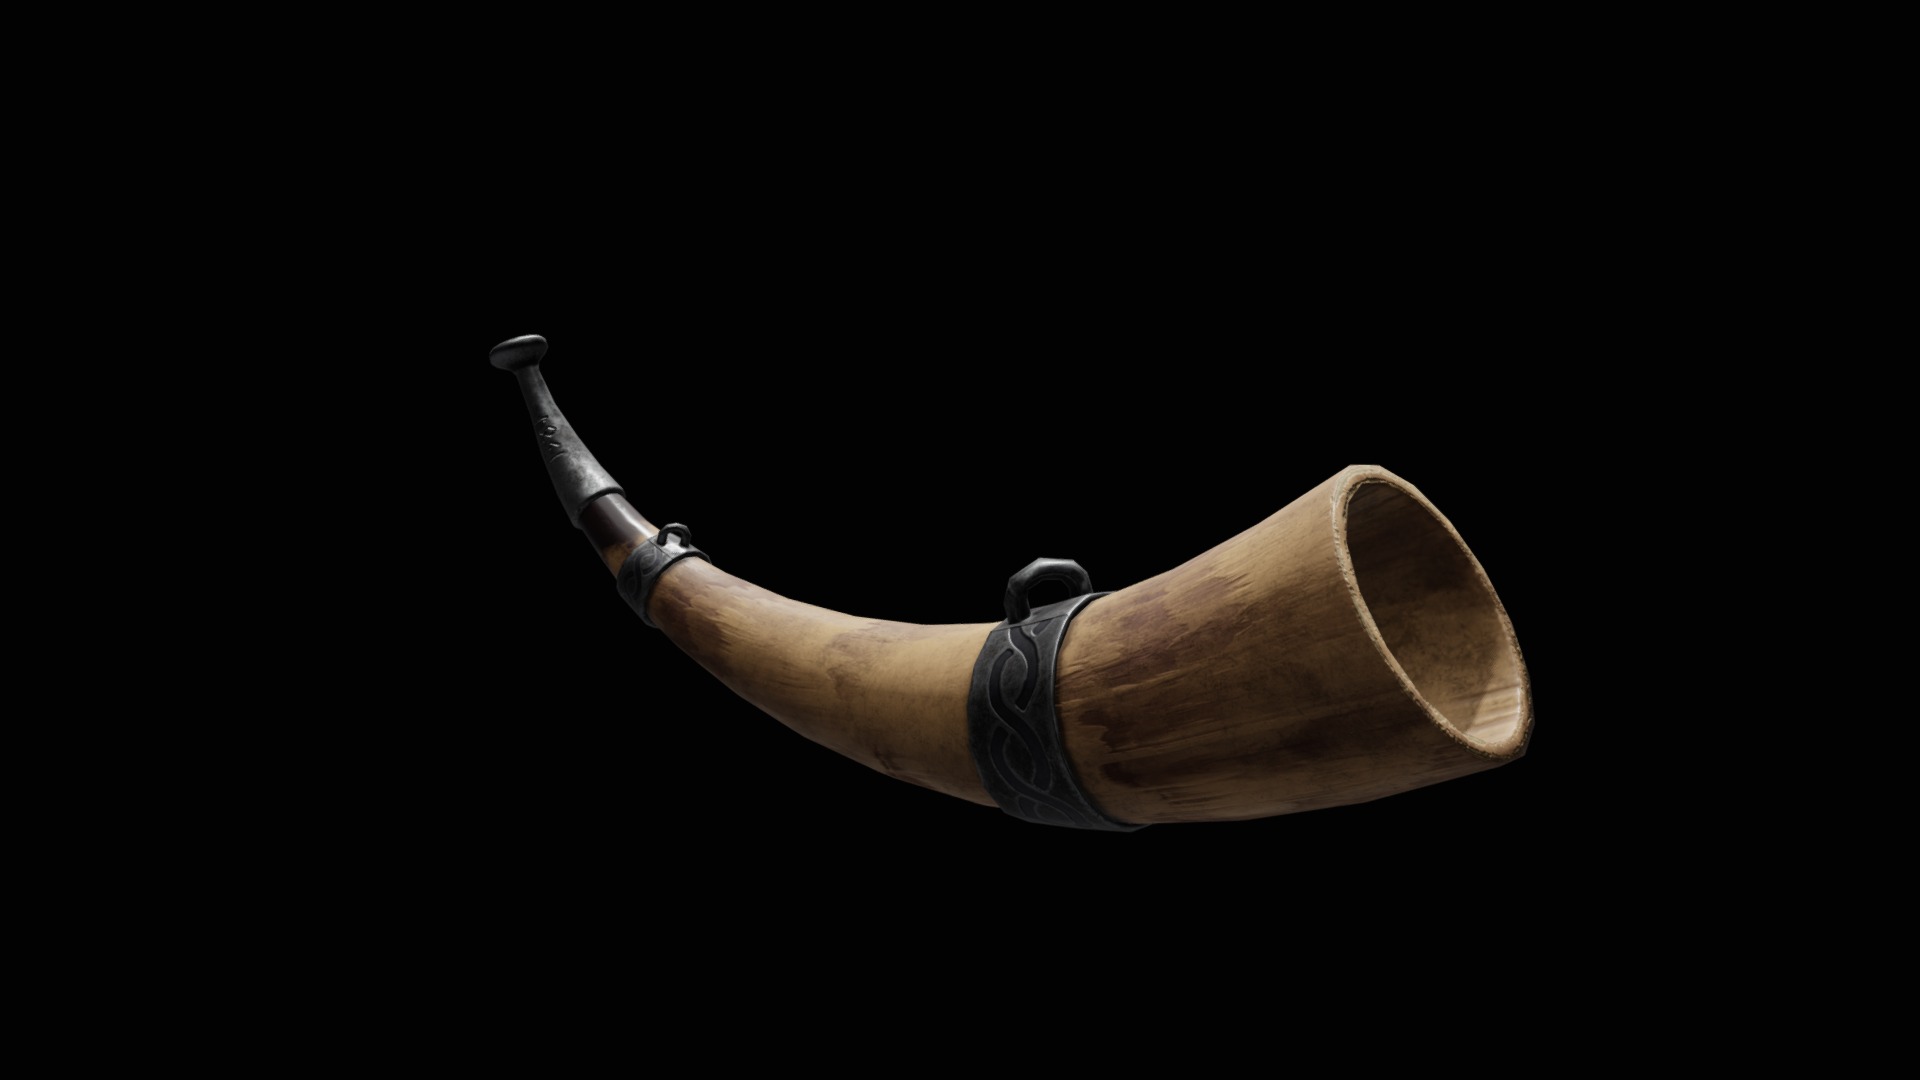 3D model Viking Warhorn - This is a 3D model of the Viking Warhorn. The 3D model is about a hand holding a ball.